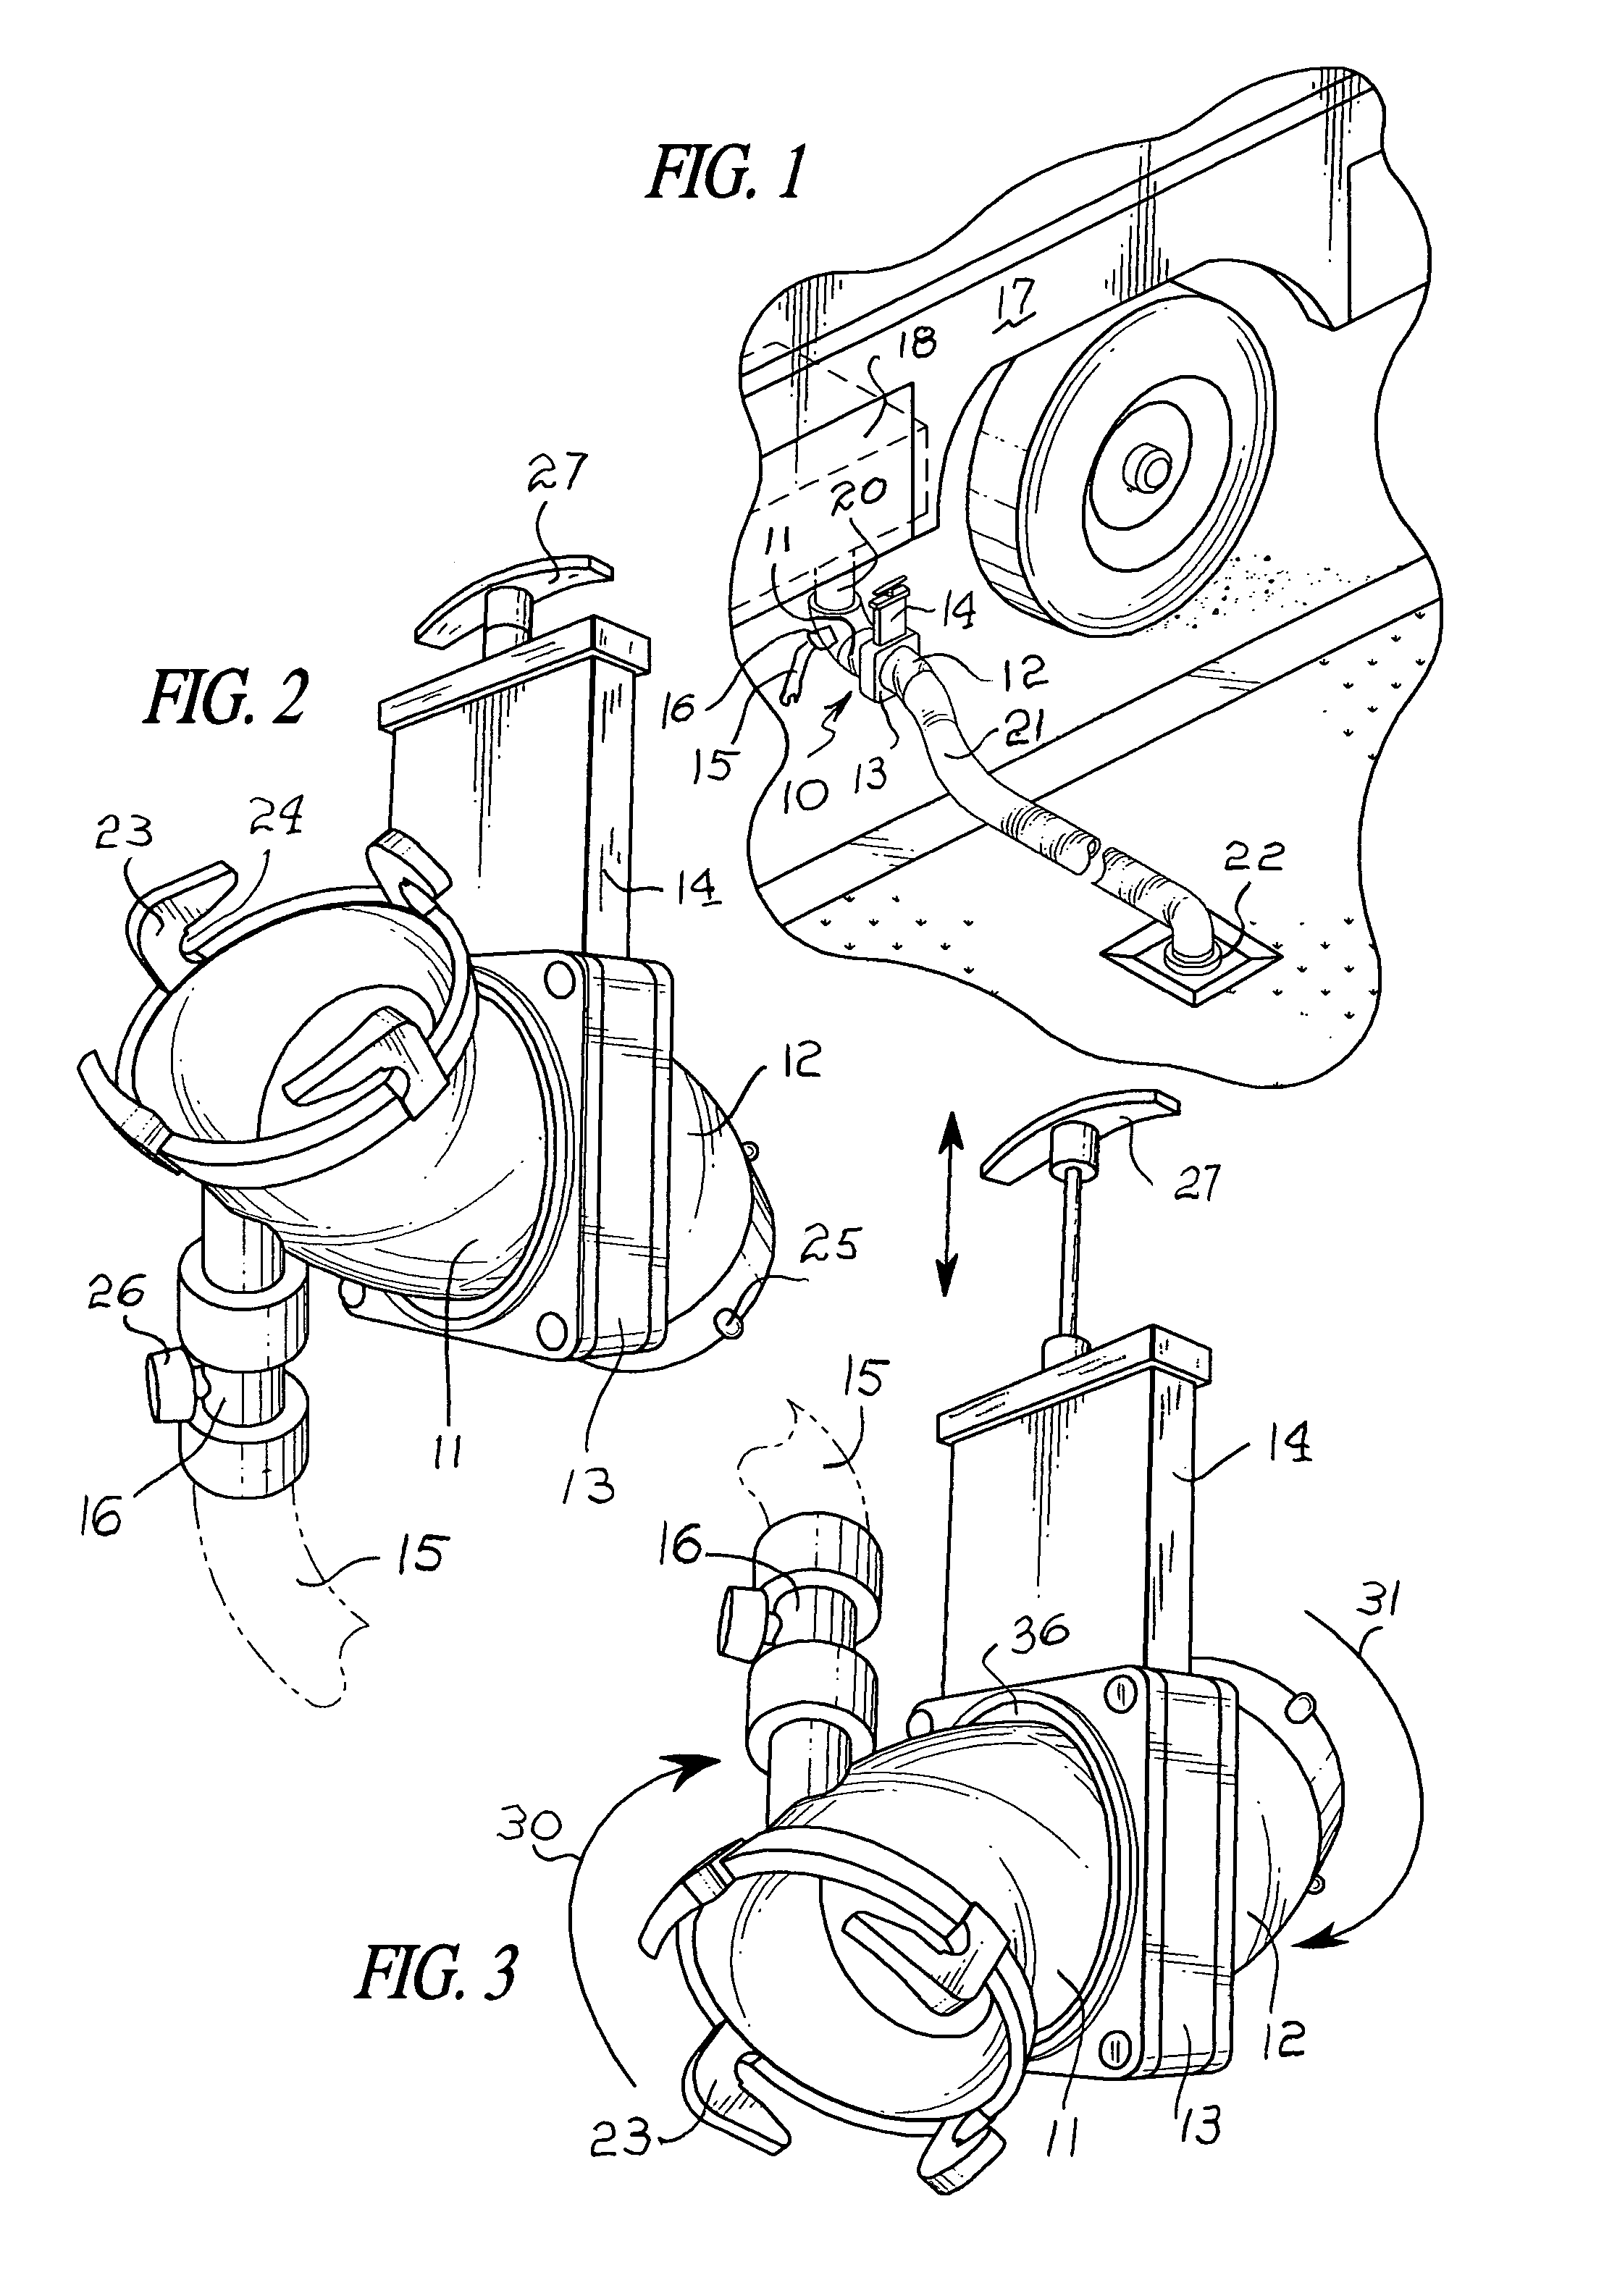 Flush valve and drain system for recreational vehicles